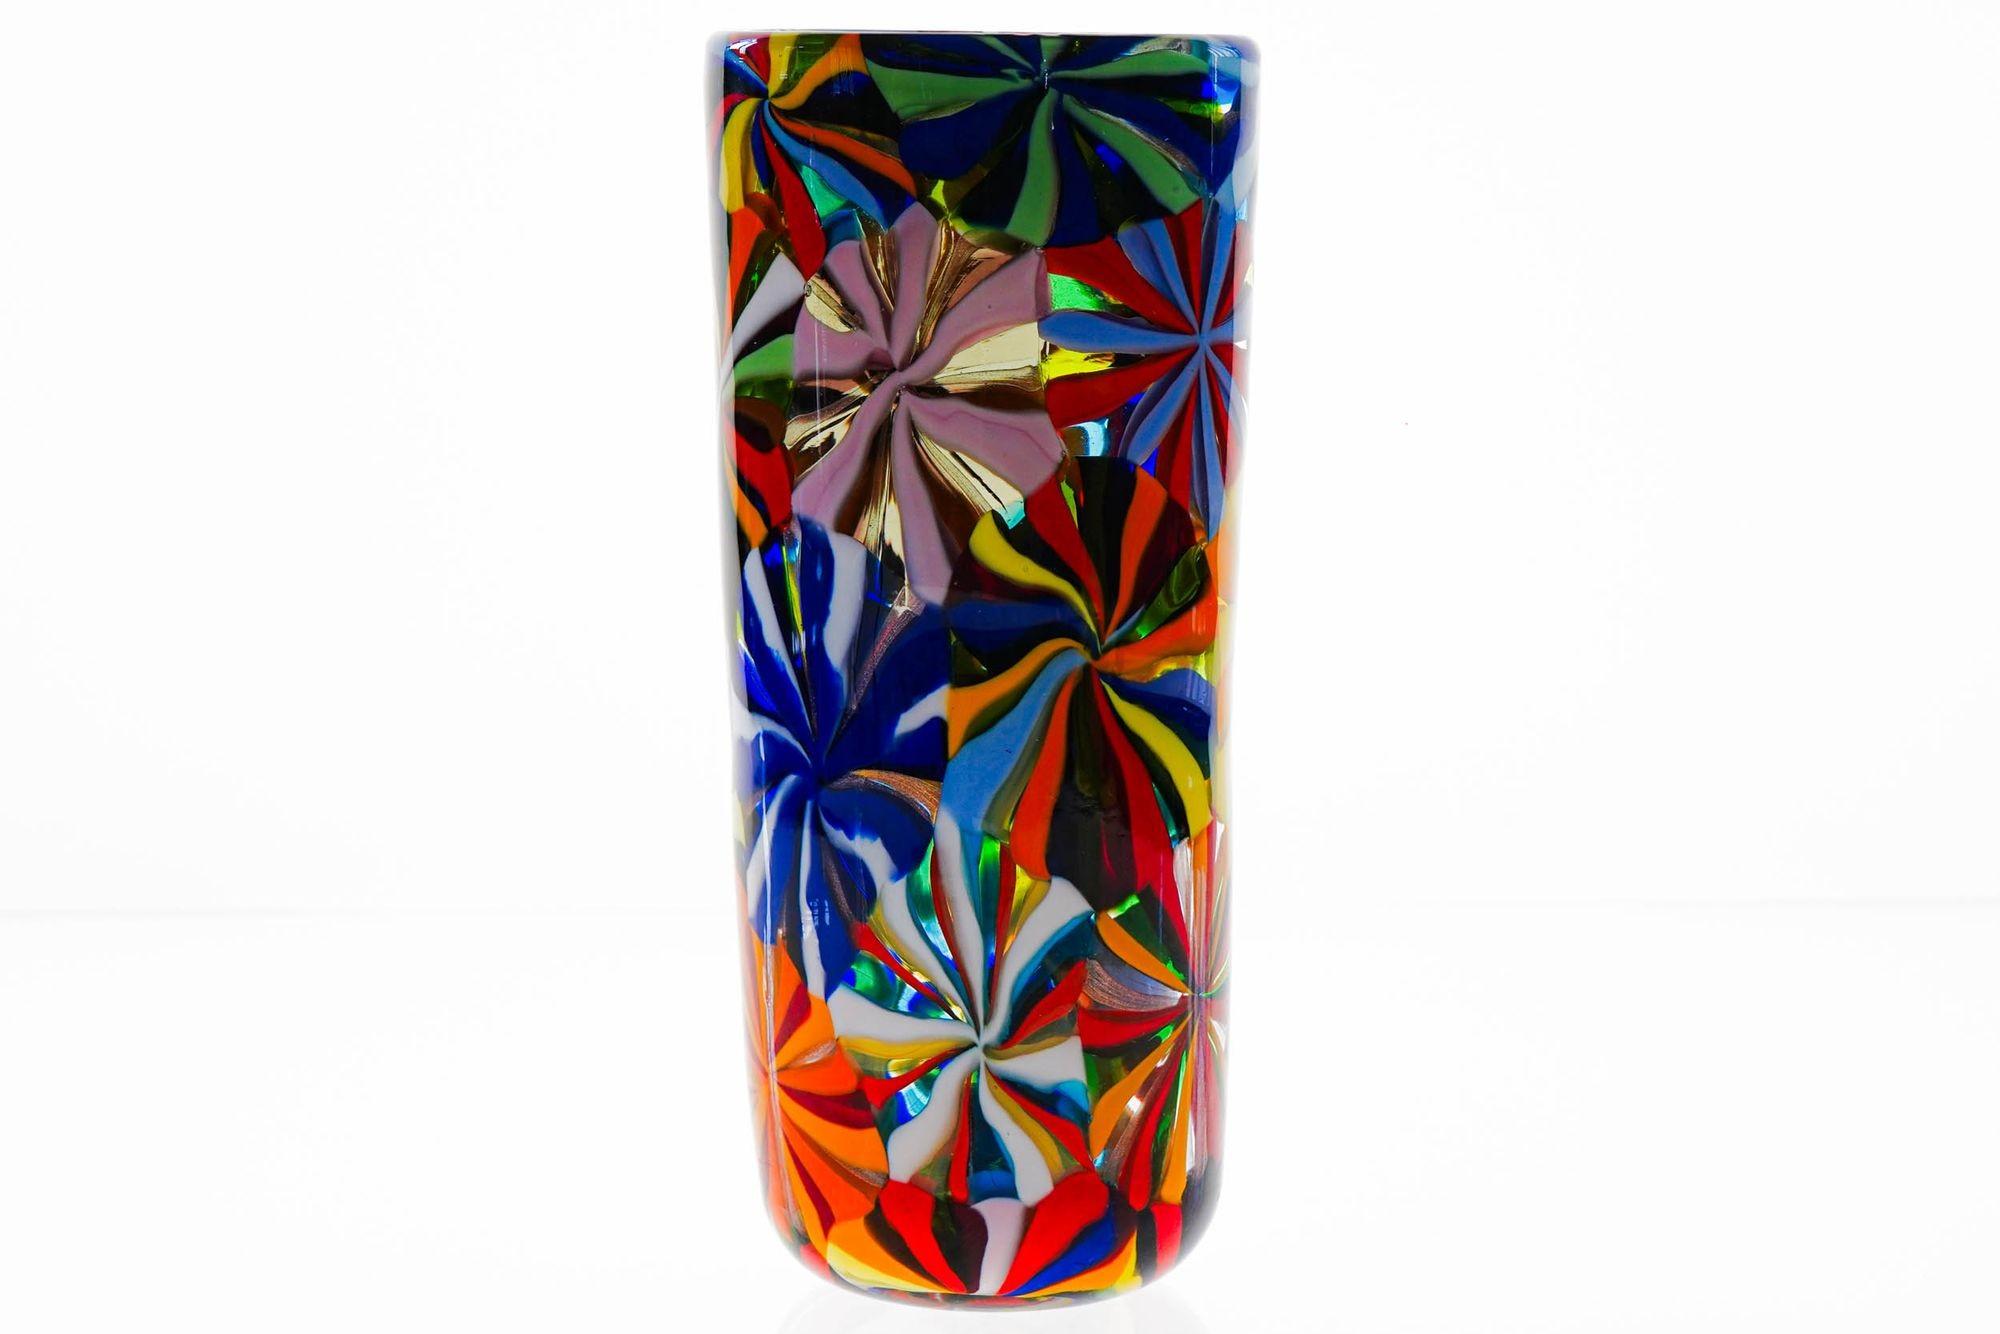 This stunning Murano mosaic vase features a perfect blend of opaque colors and a sophisticated mosaic technique.

The stellato finish is achieved by rolling canes of various colors over a small blob of heated glass. Using glass scissors, flat discs